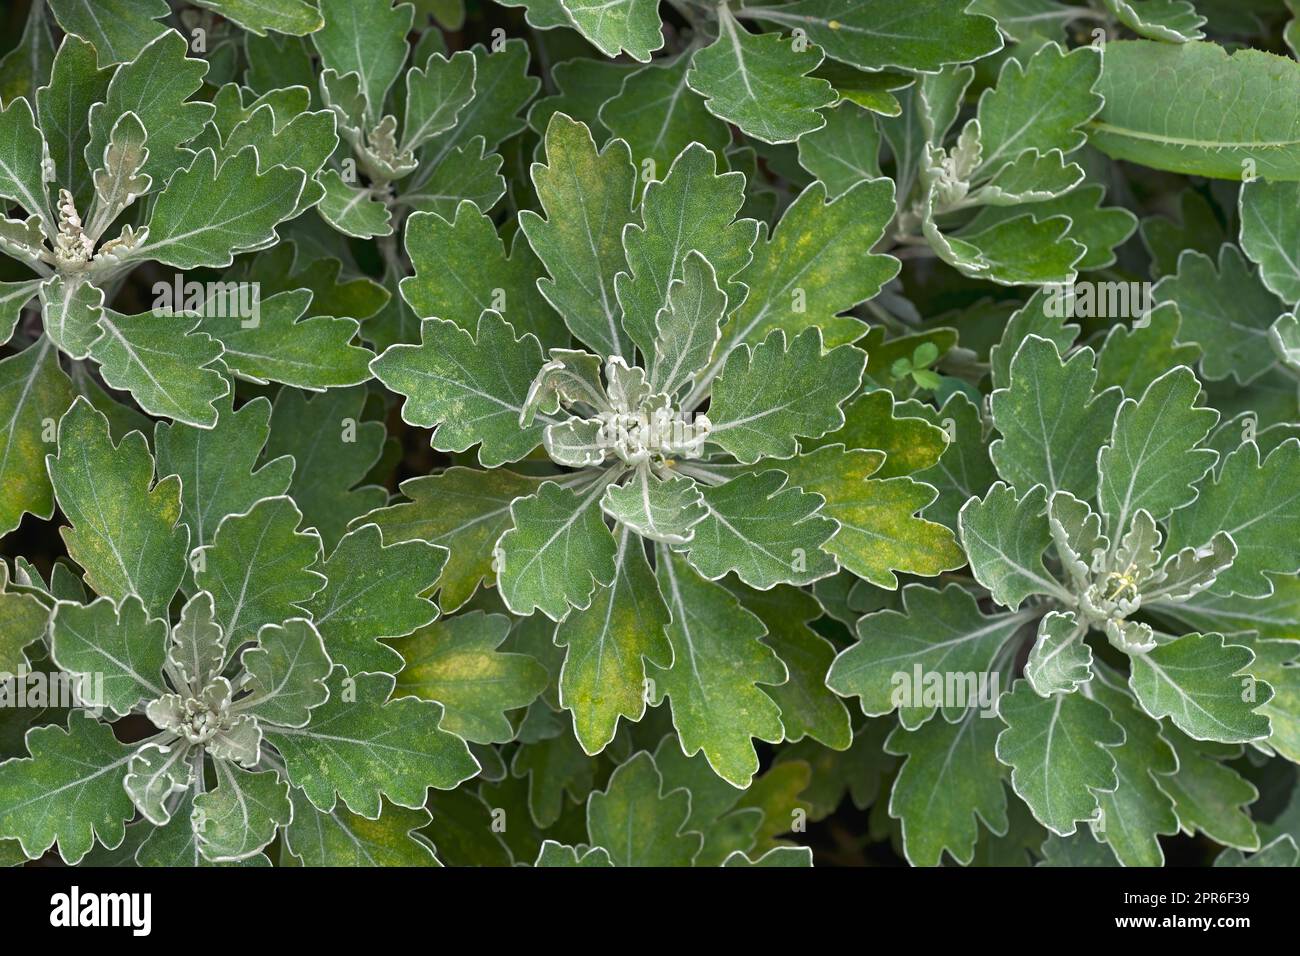 Close-up image of Gold and silver chrysanthemum plants Stock Photo